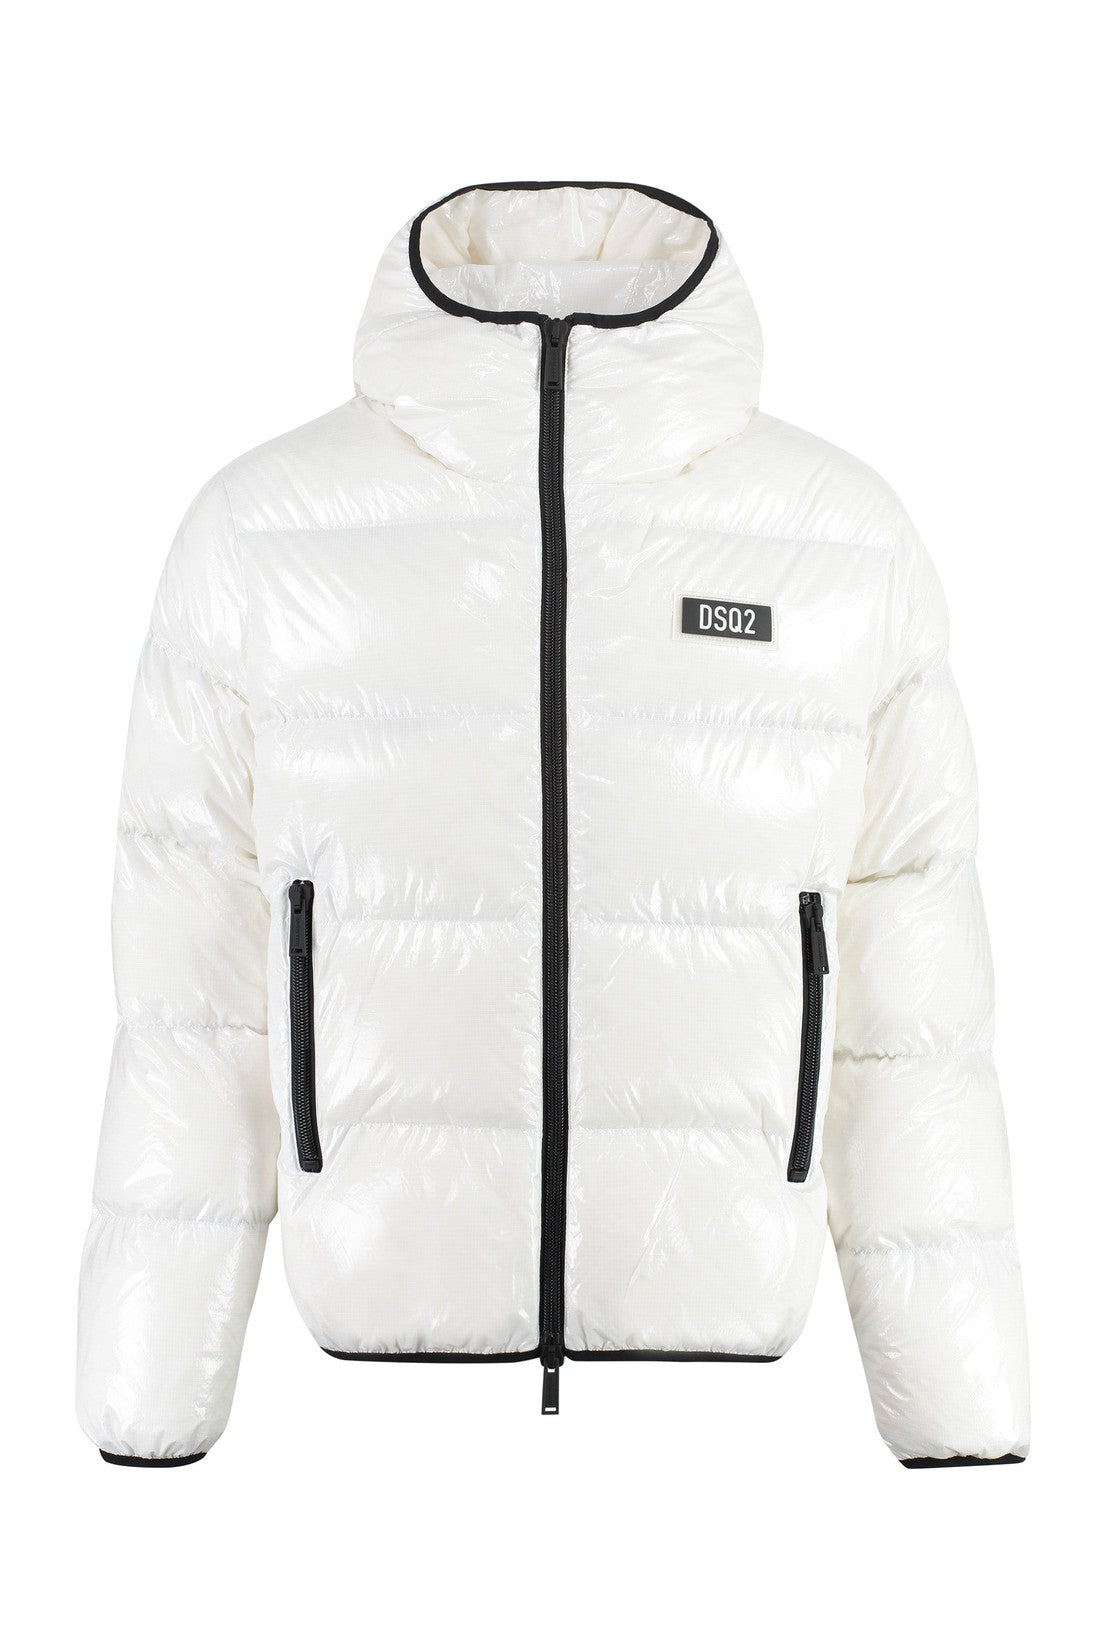 Dsquared2-OUTLET-SALE-Kaban hooded shiny down jacket-ARCHIVIST